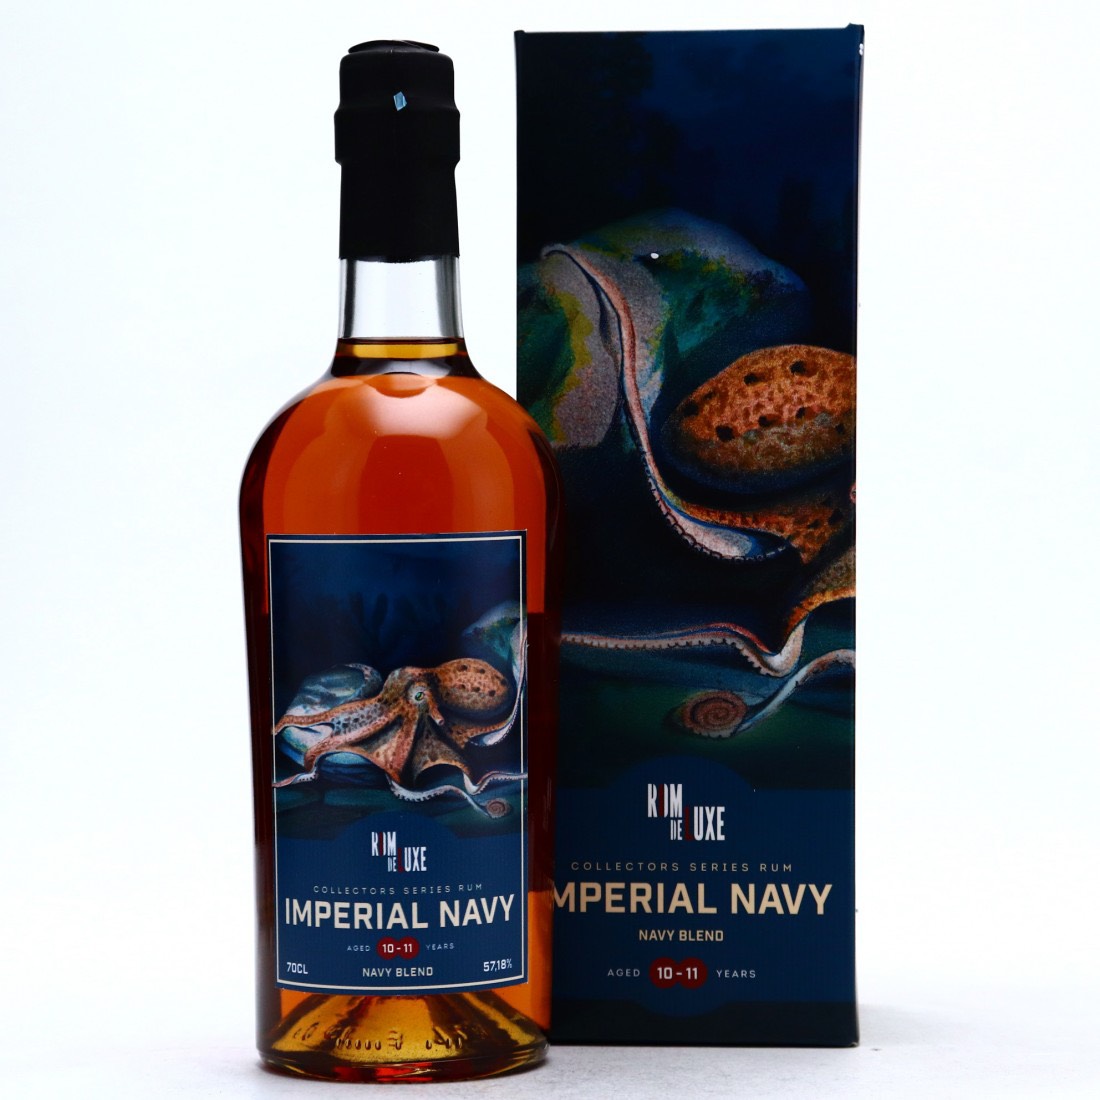 Bottle image of Collectors Series No. 1 Imperial Navy